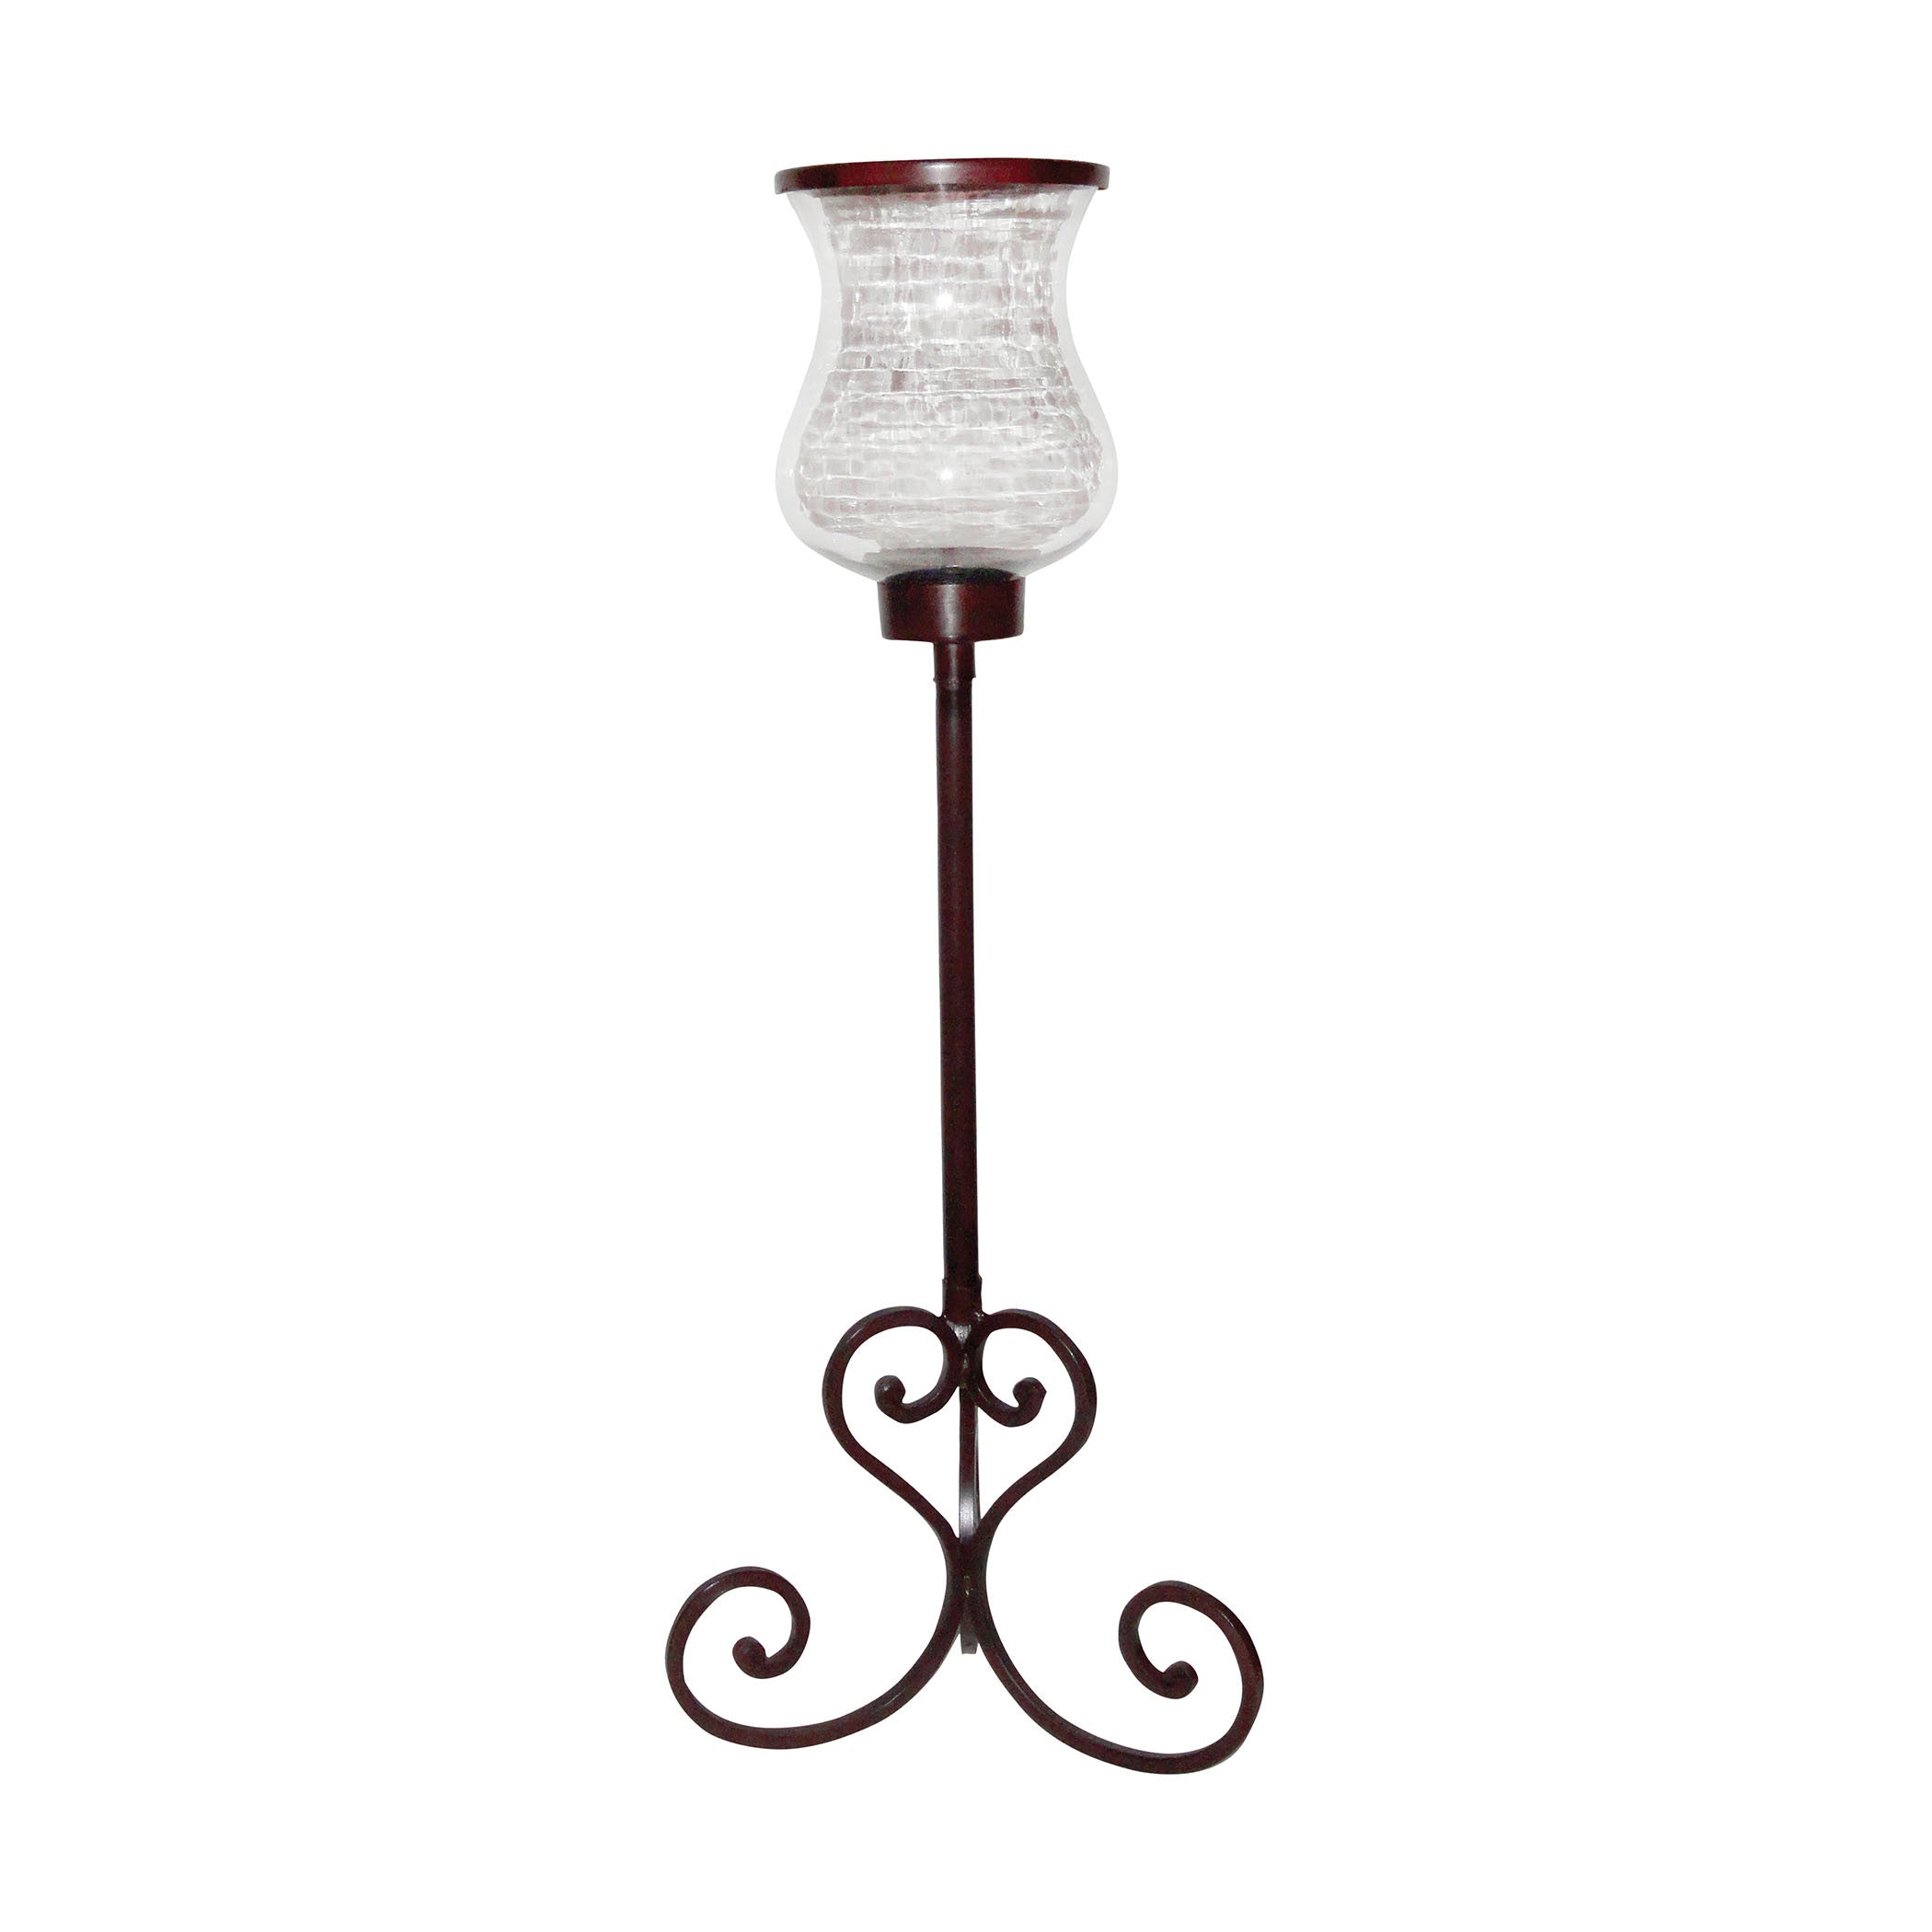 Pomeroy Pom-618154 Deseo Collection Montana Rustic,clear Finish Candle/candle Holder